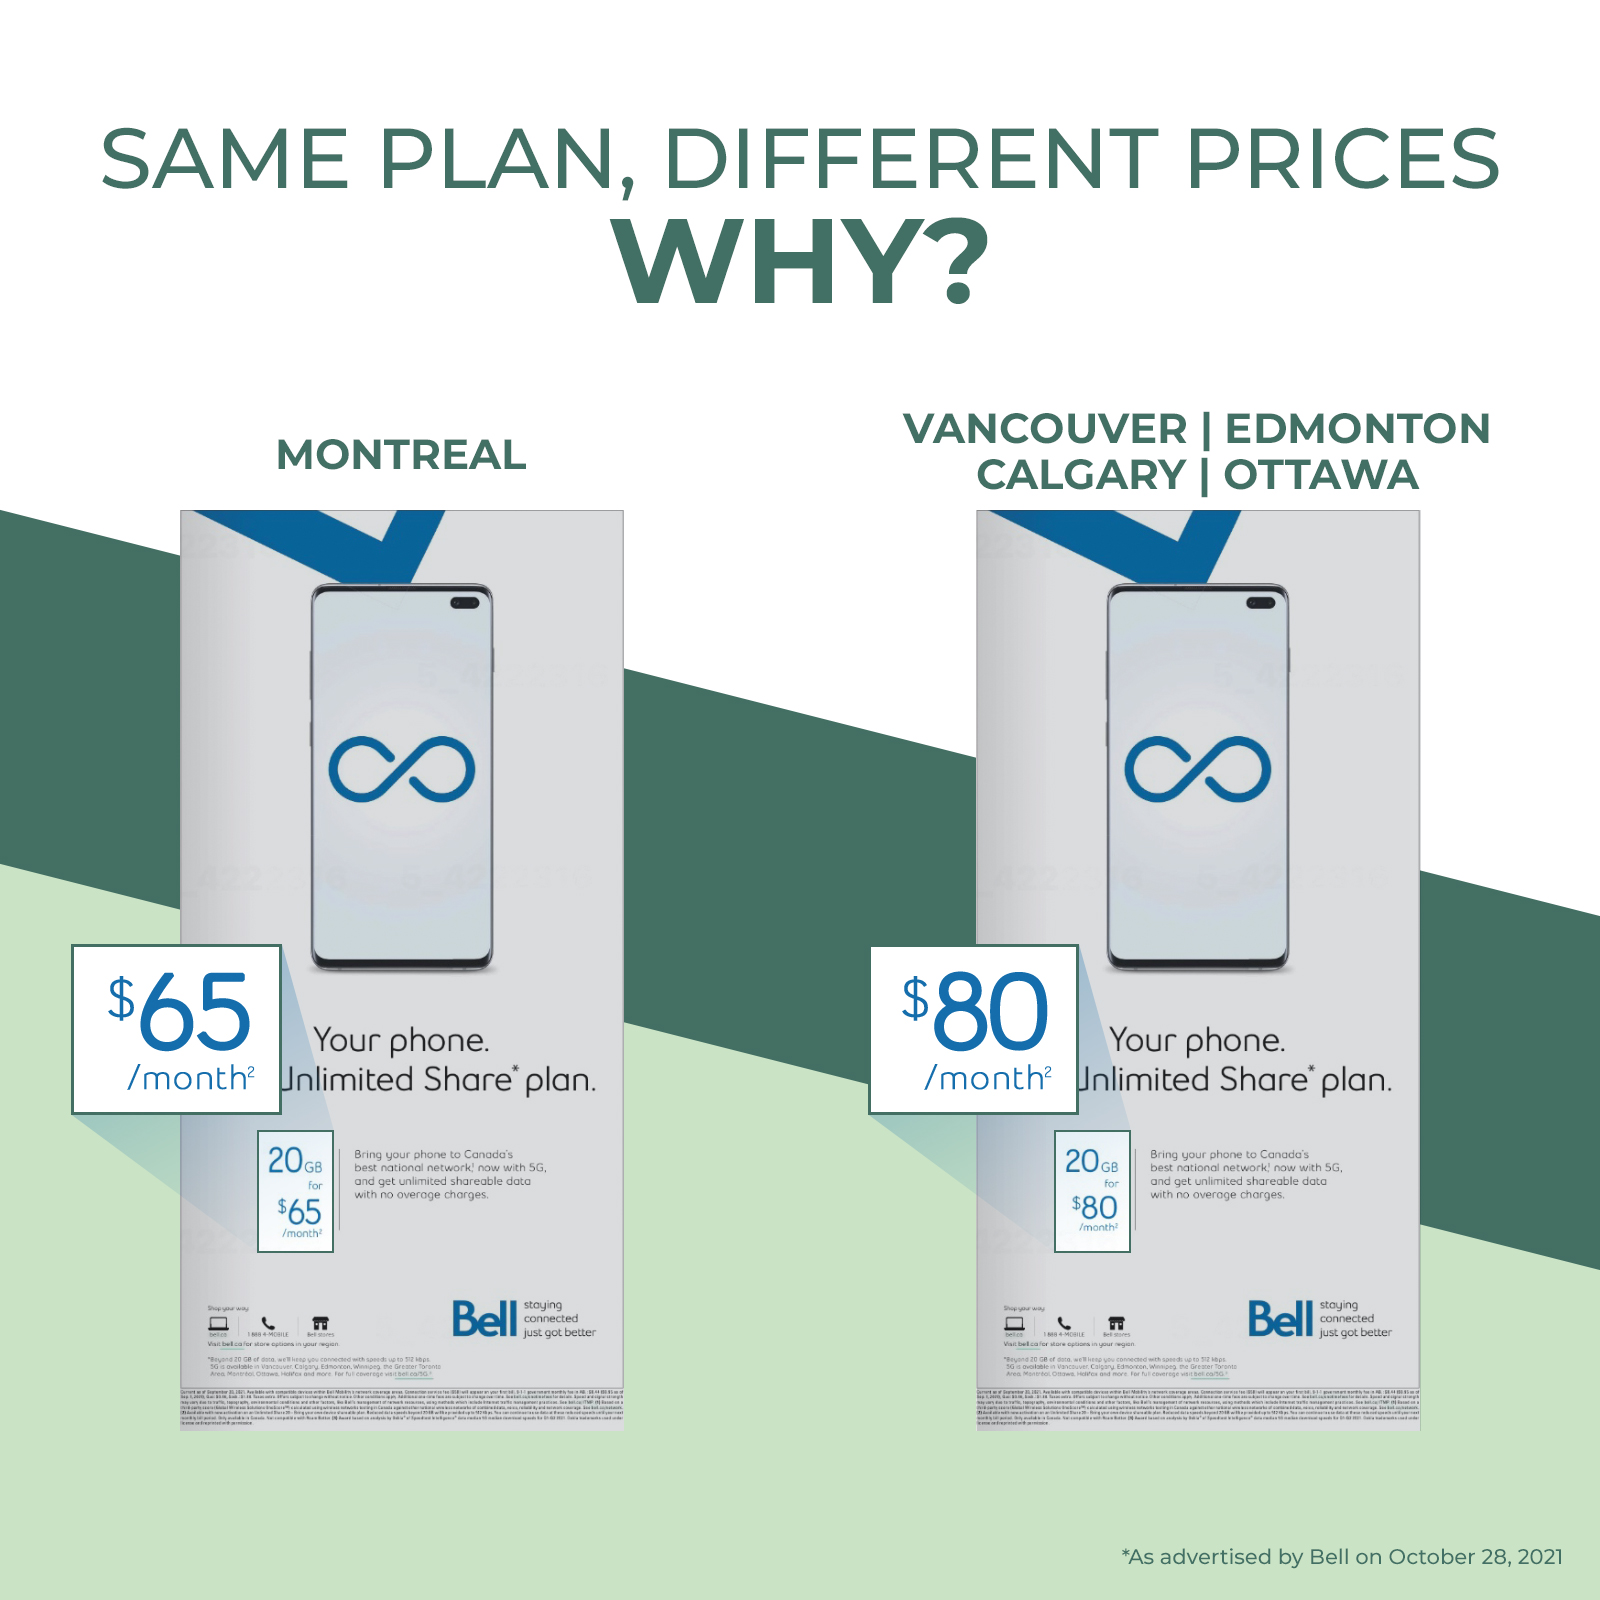 Same wireless plan, different price. Why?